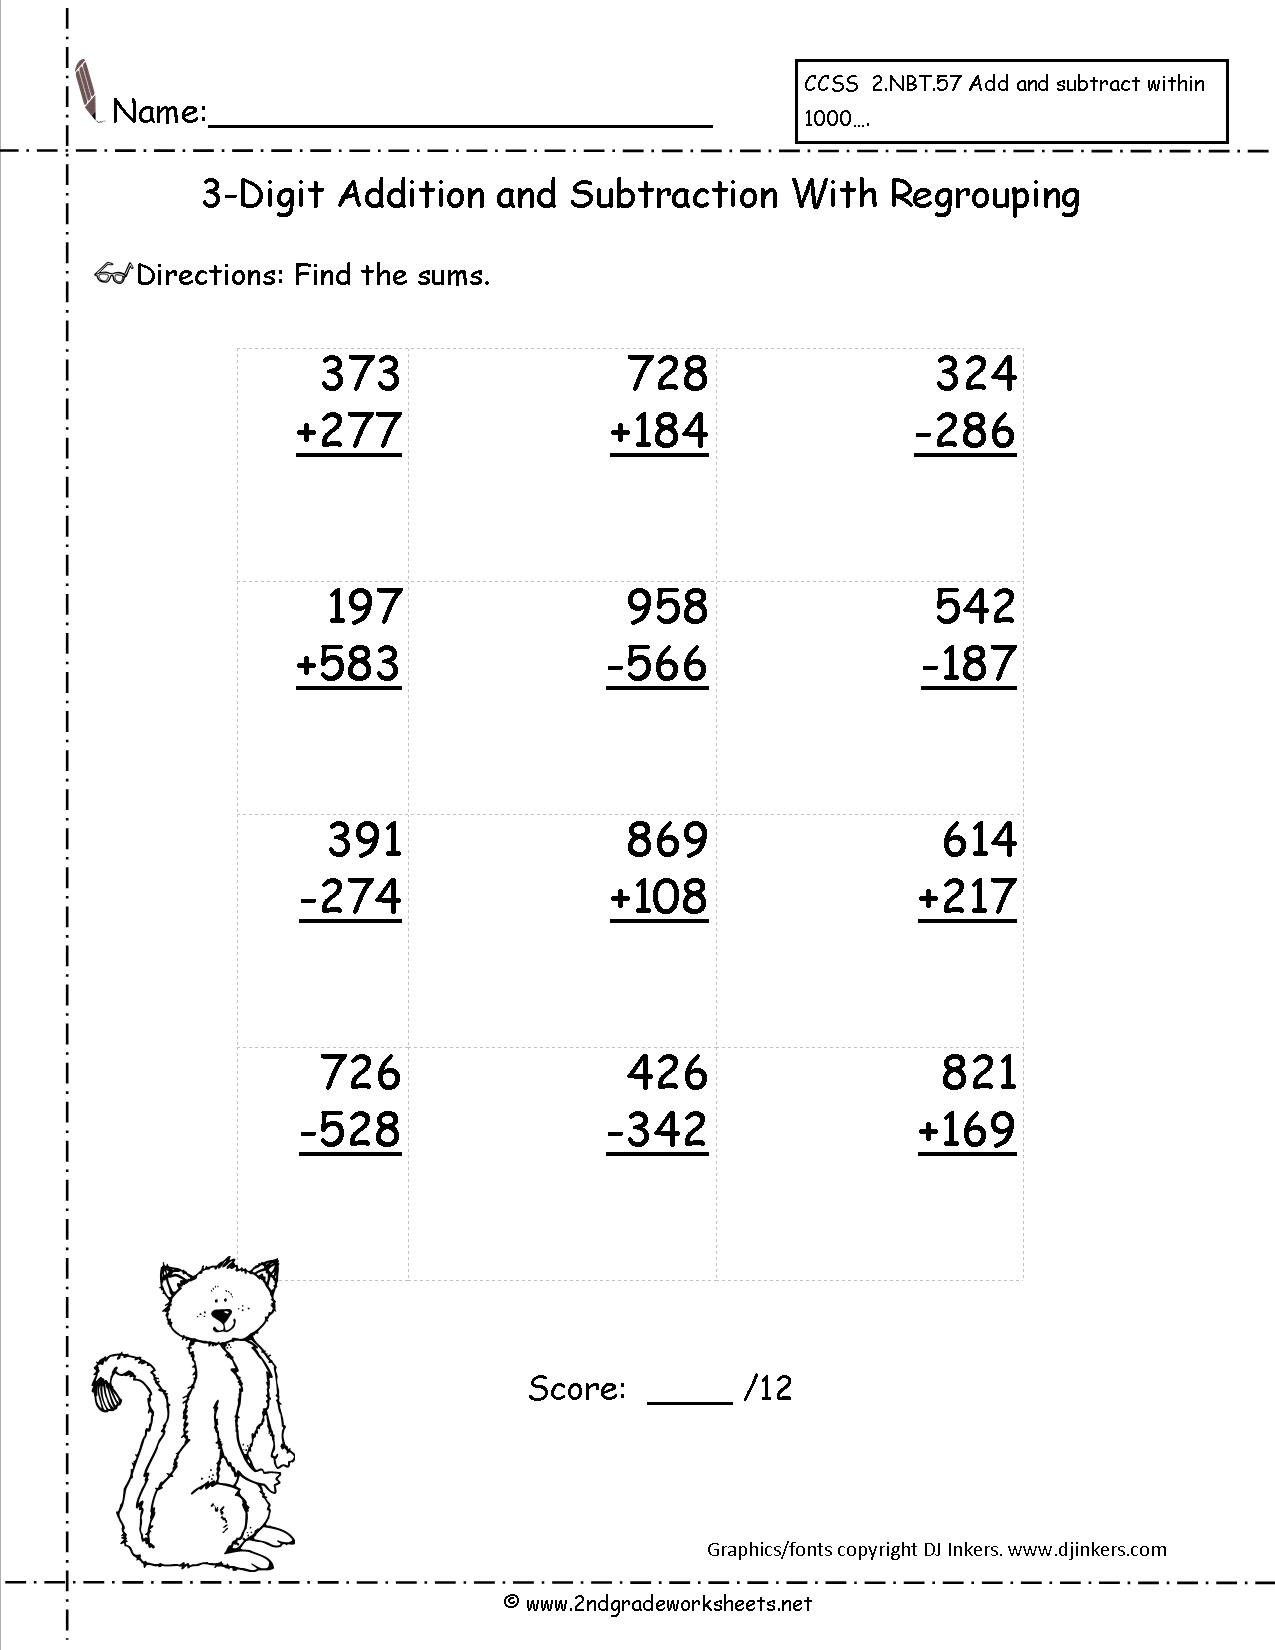 Free Addition Worksheets 3 Digit Without Regrouping Addition Without Regrouping With 3 Digits